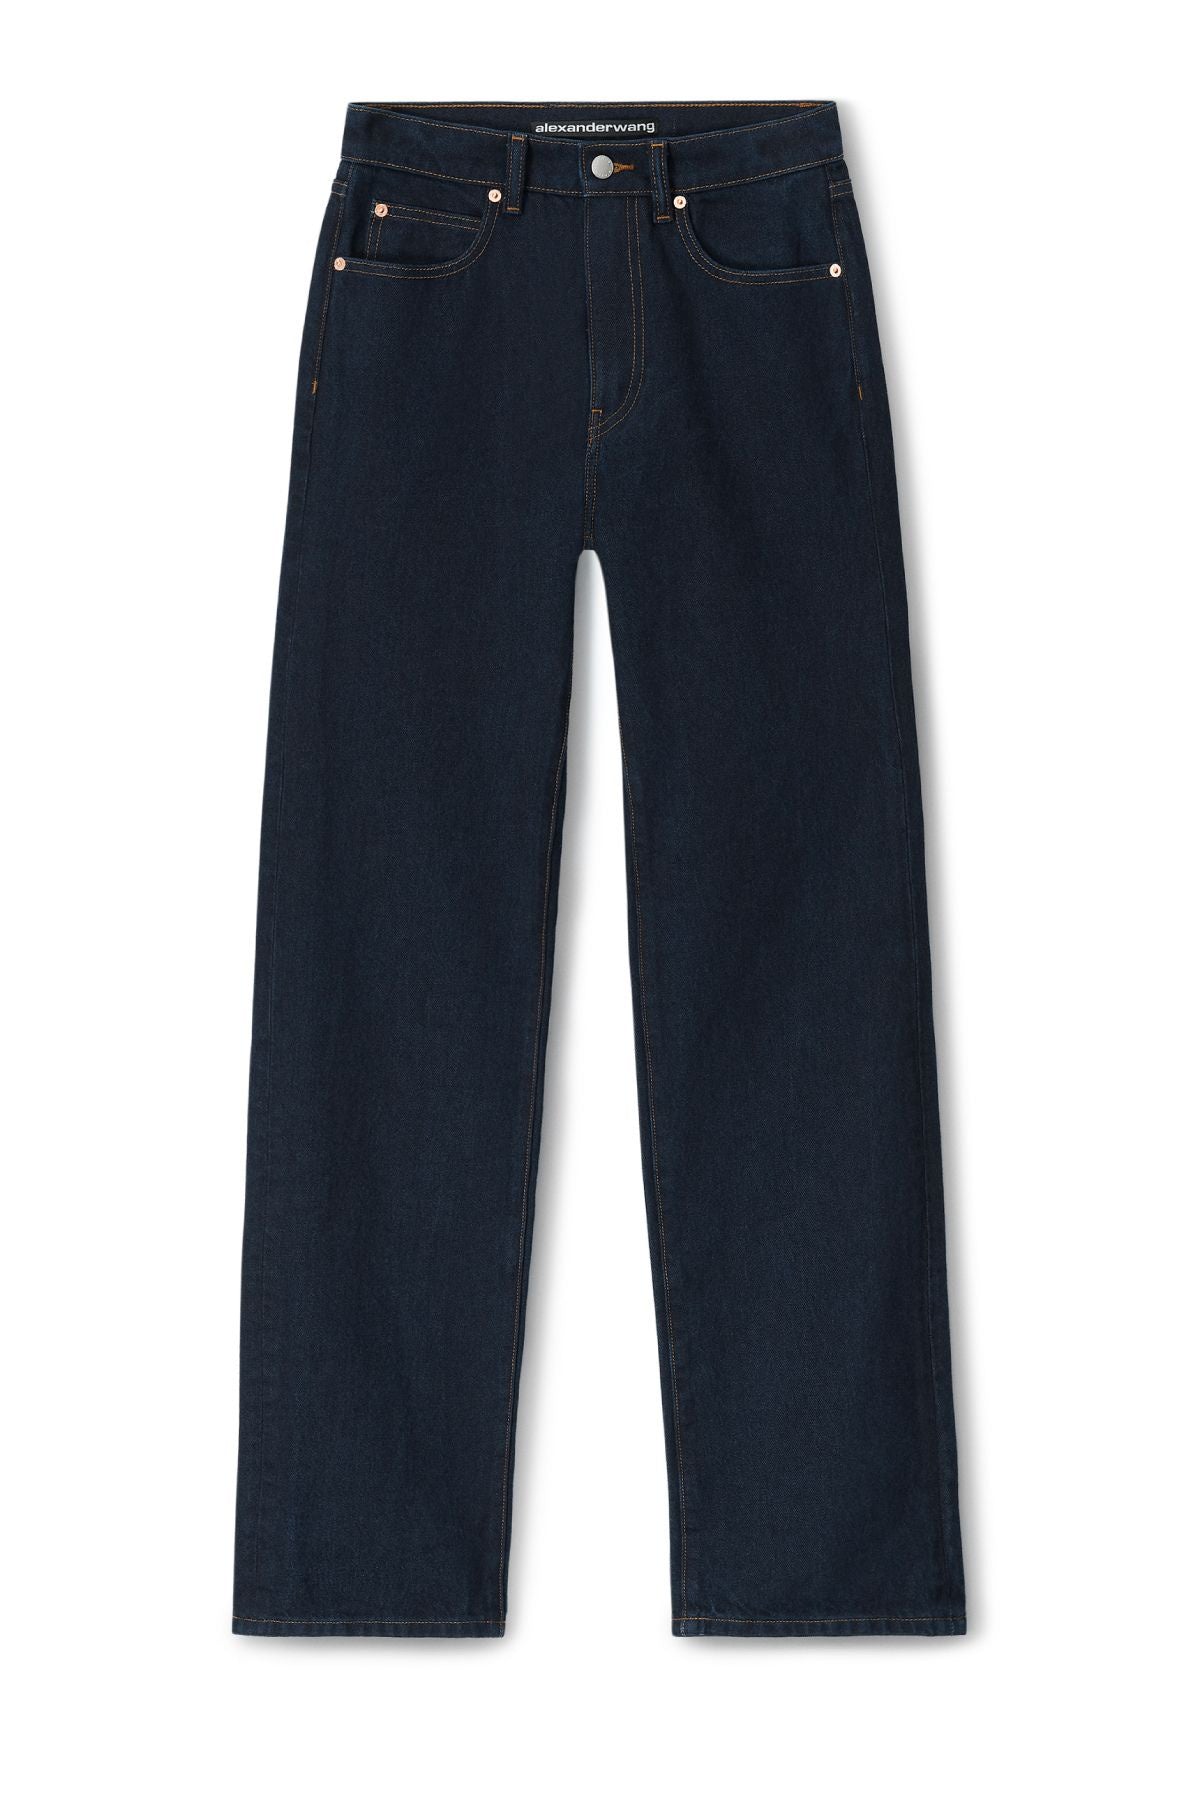 Alexander Wang EZ Mid Rise Relaxed Straight Jeans - Clean Bright Indigo